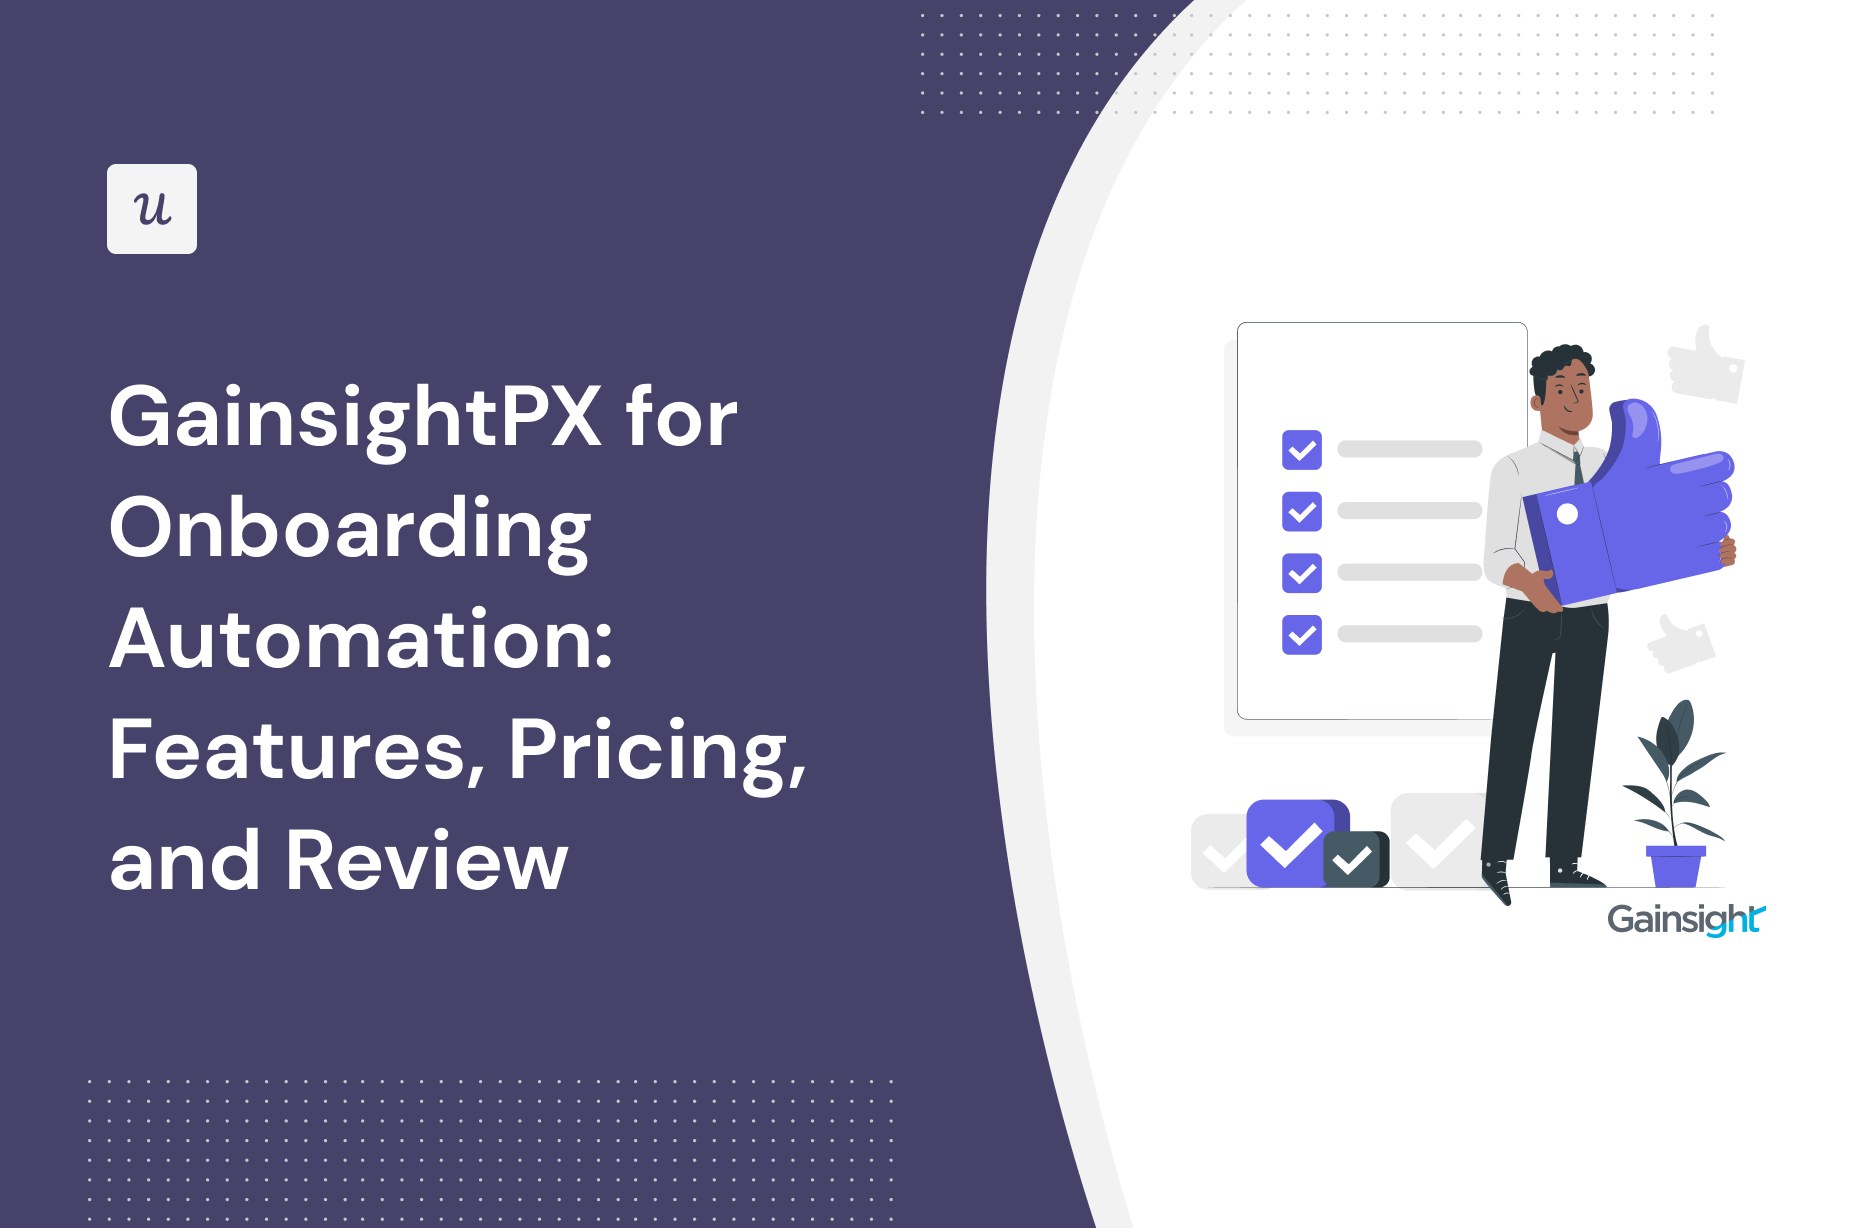 GainsightPX for Onboarding Automation: Features, Pricing, and Review